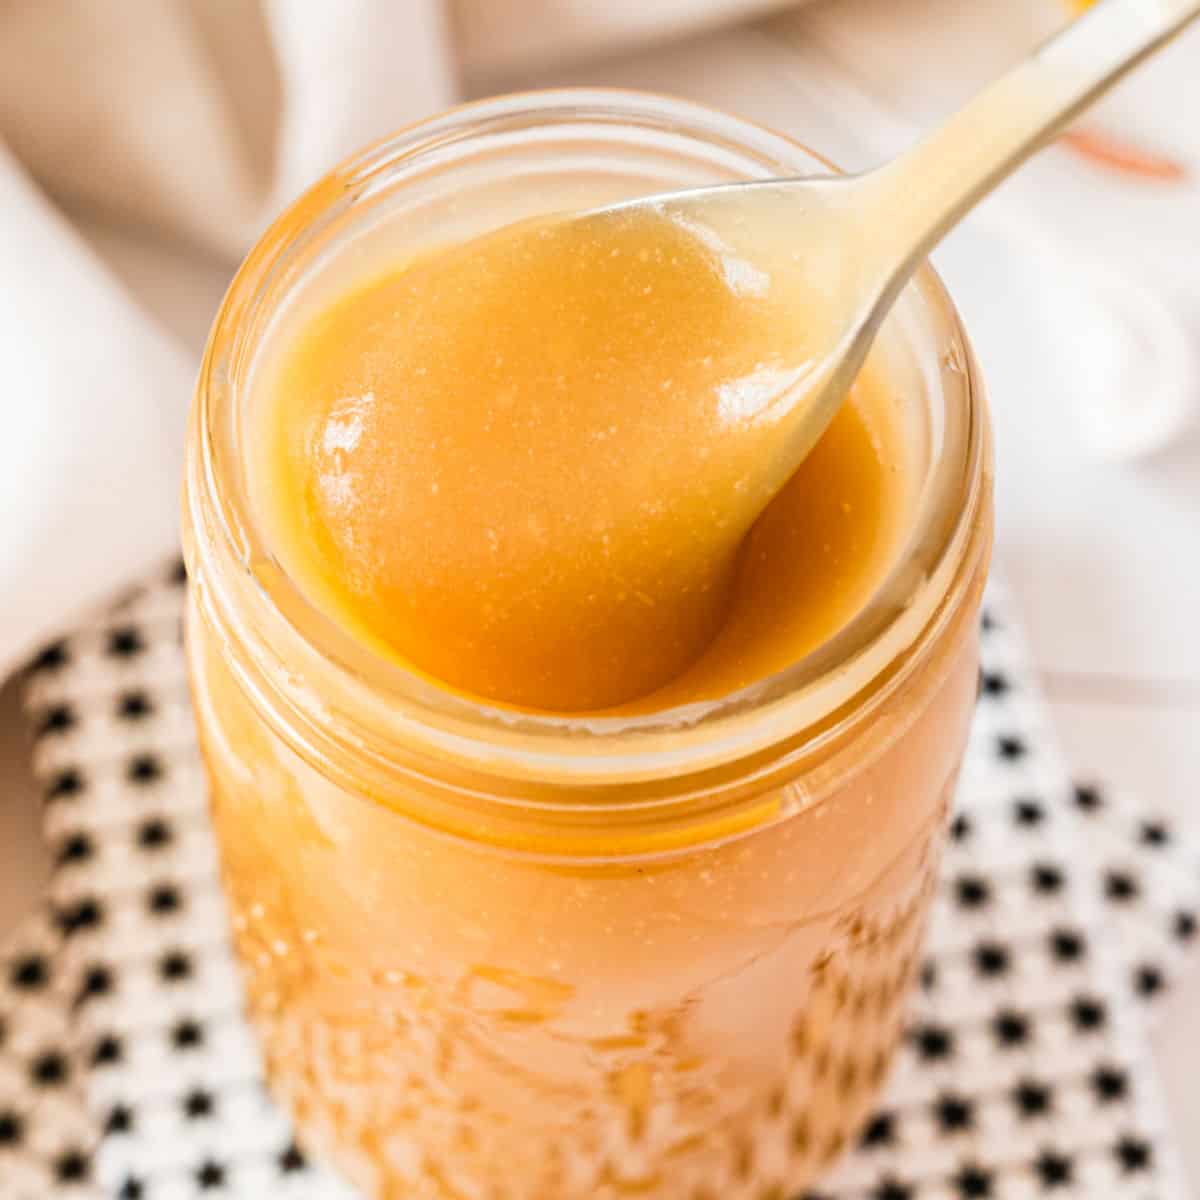 square image of a jar of salted caramel sauce with a spoon